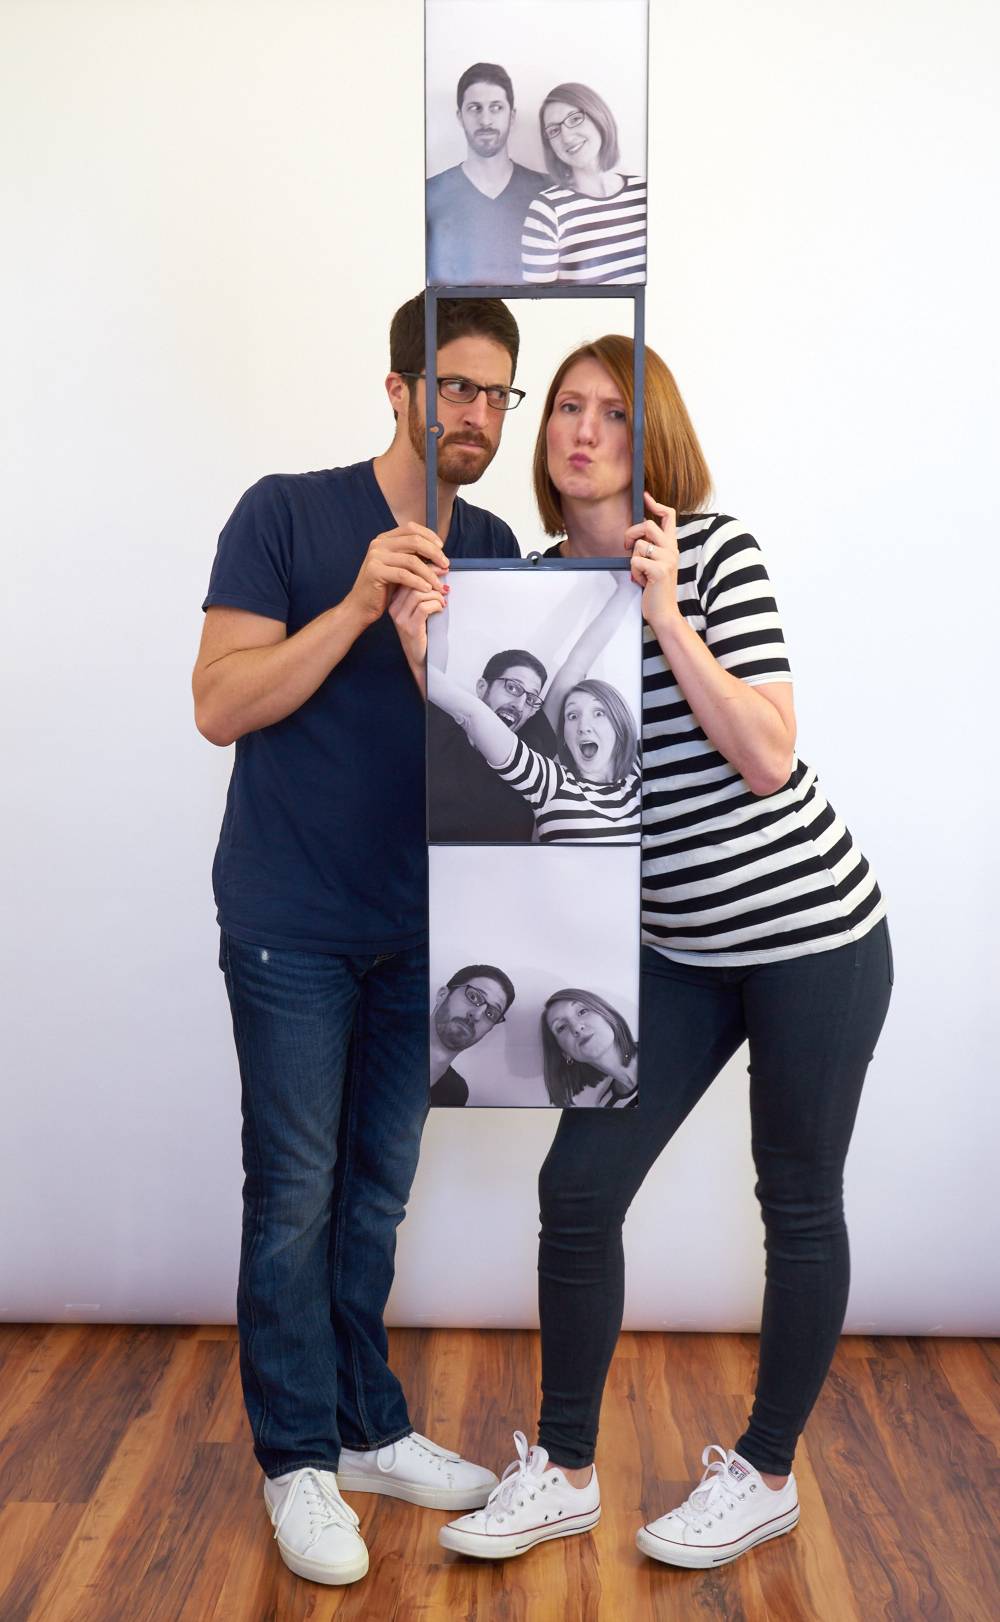 A man and a woman in a black and white striped shirt pose with pictures.